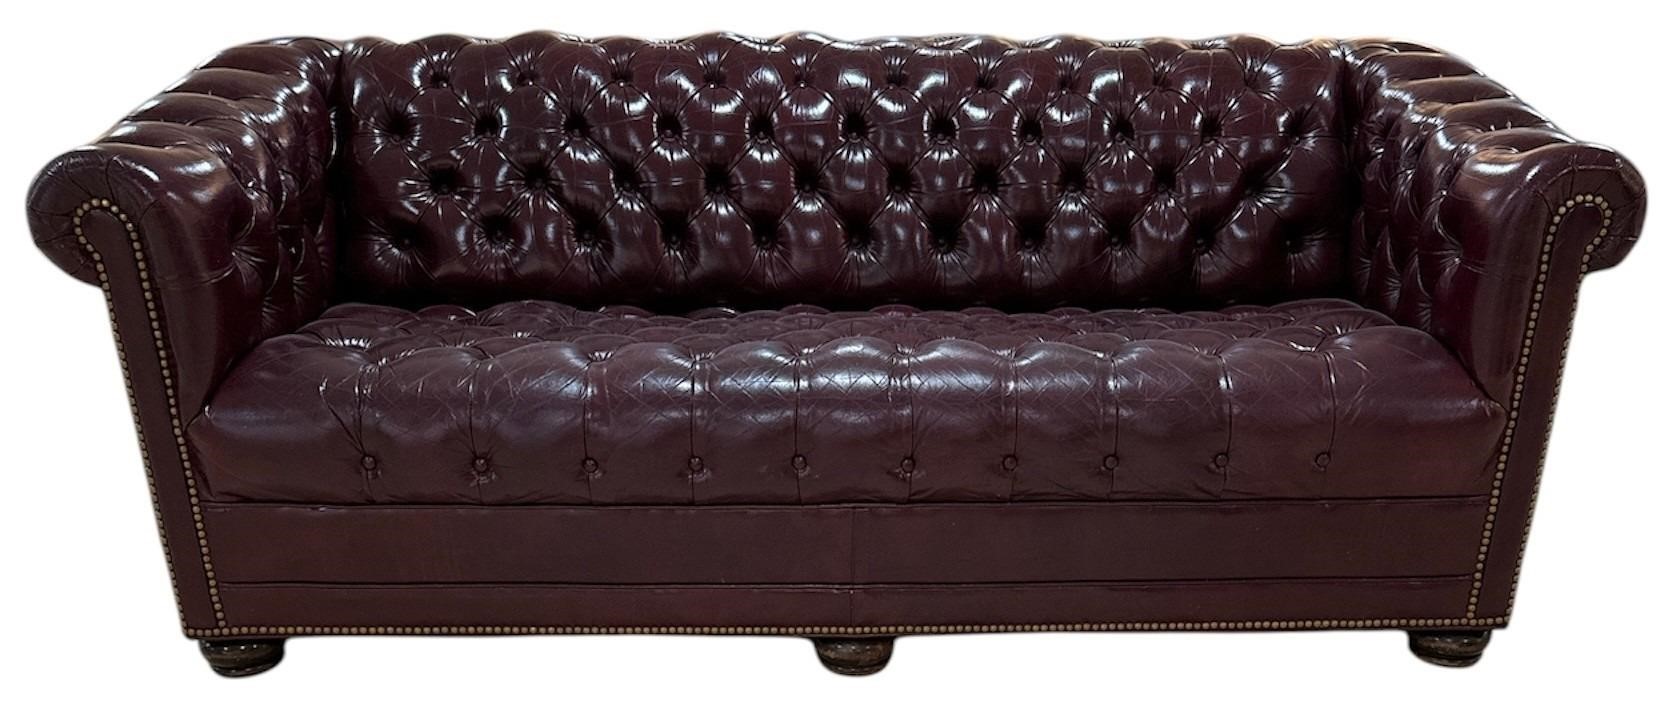 HANDCOCK & MOORE Leather Chesterfield Sofa / Couch